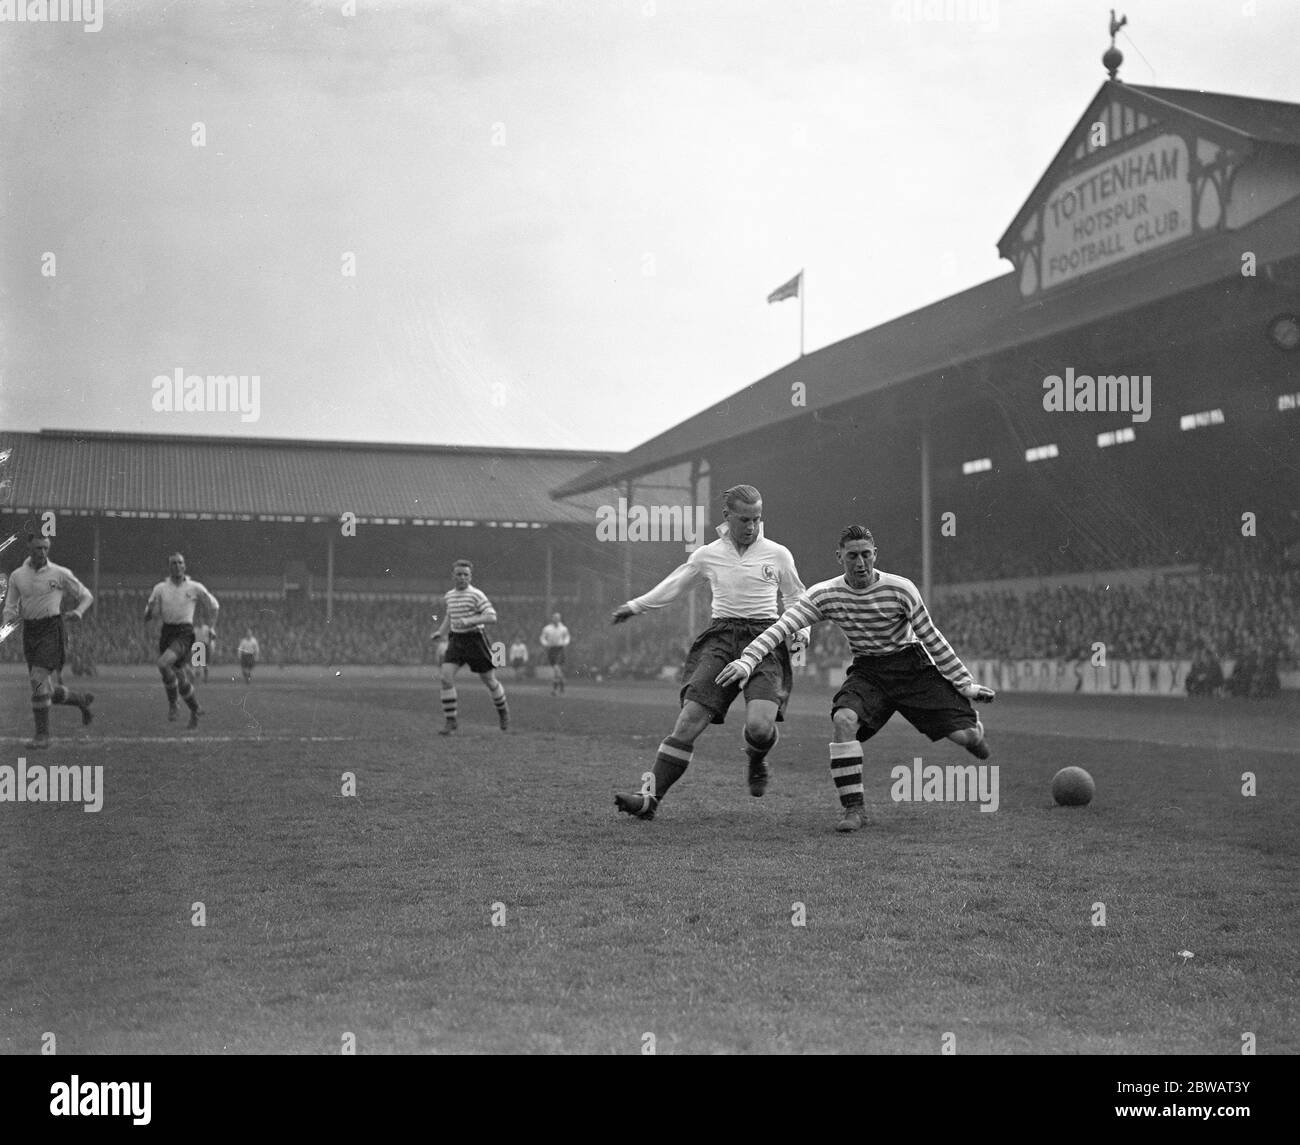 Tottenham Hotspur football club versus Fulham Football Club . Ralph Ward ( Spurs , white shirt ) challenges Ronnie Rooke ( Fulham ) for the ball . 24 April 1937 Stock Photo